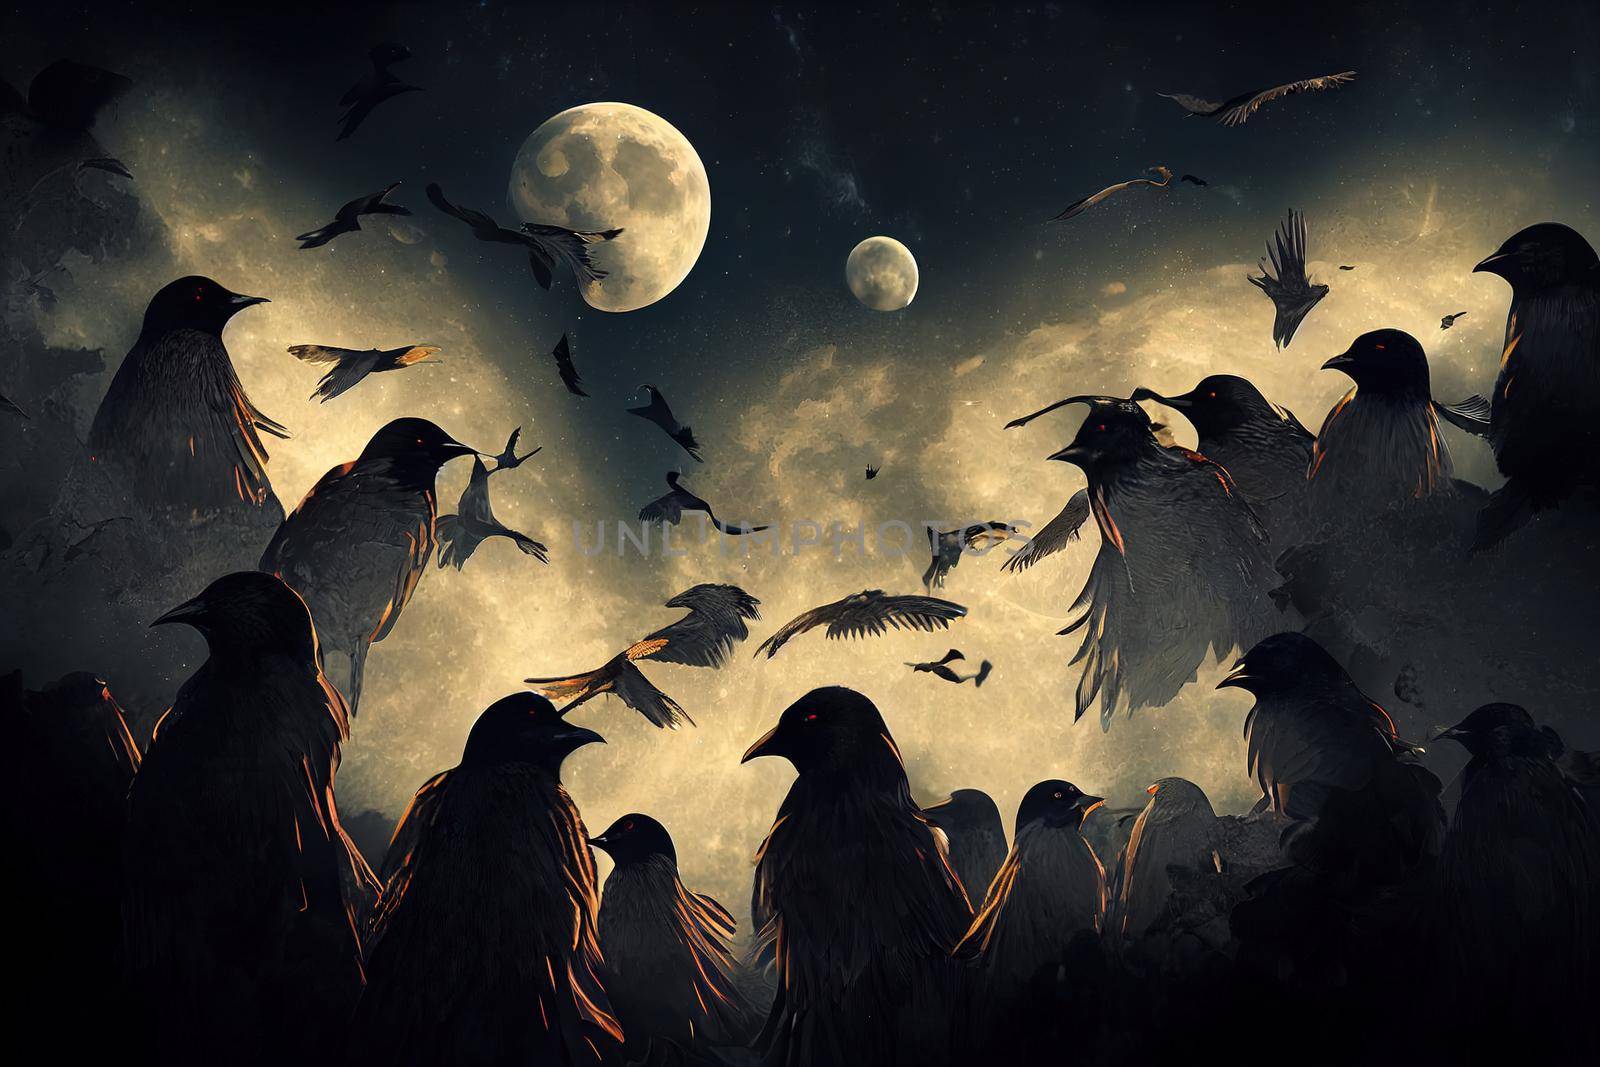 Dramatic mystical background - glowing full moon rises, flock of crows flies in dark sky, Elements of this image furnished by NASA 2d style, illustration, design v2